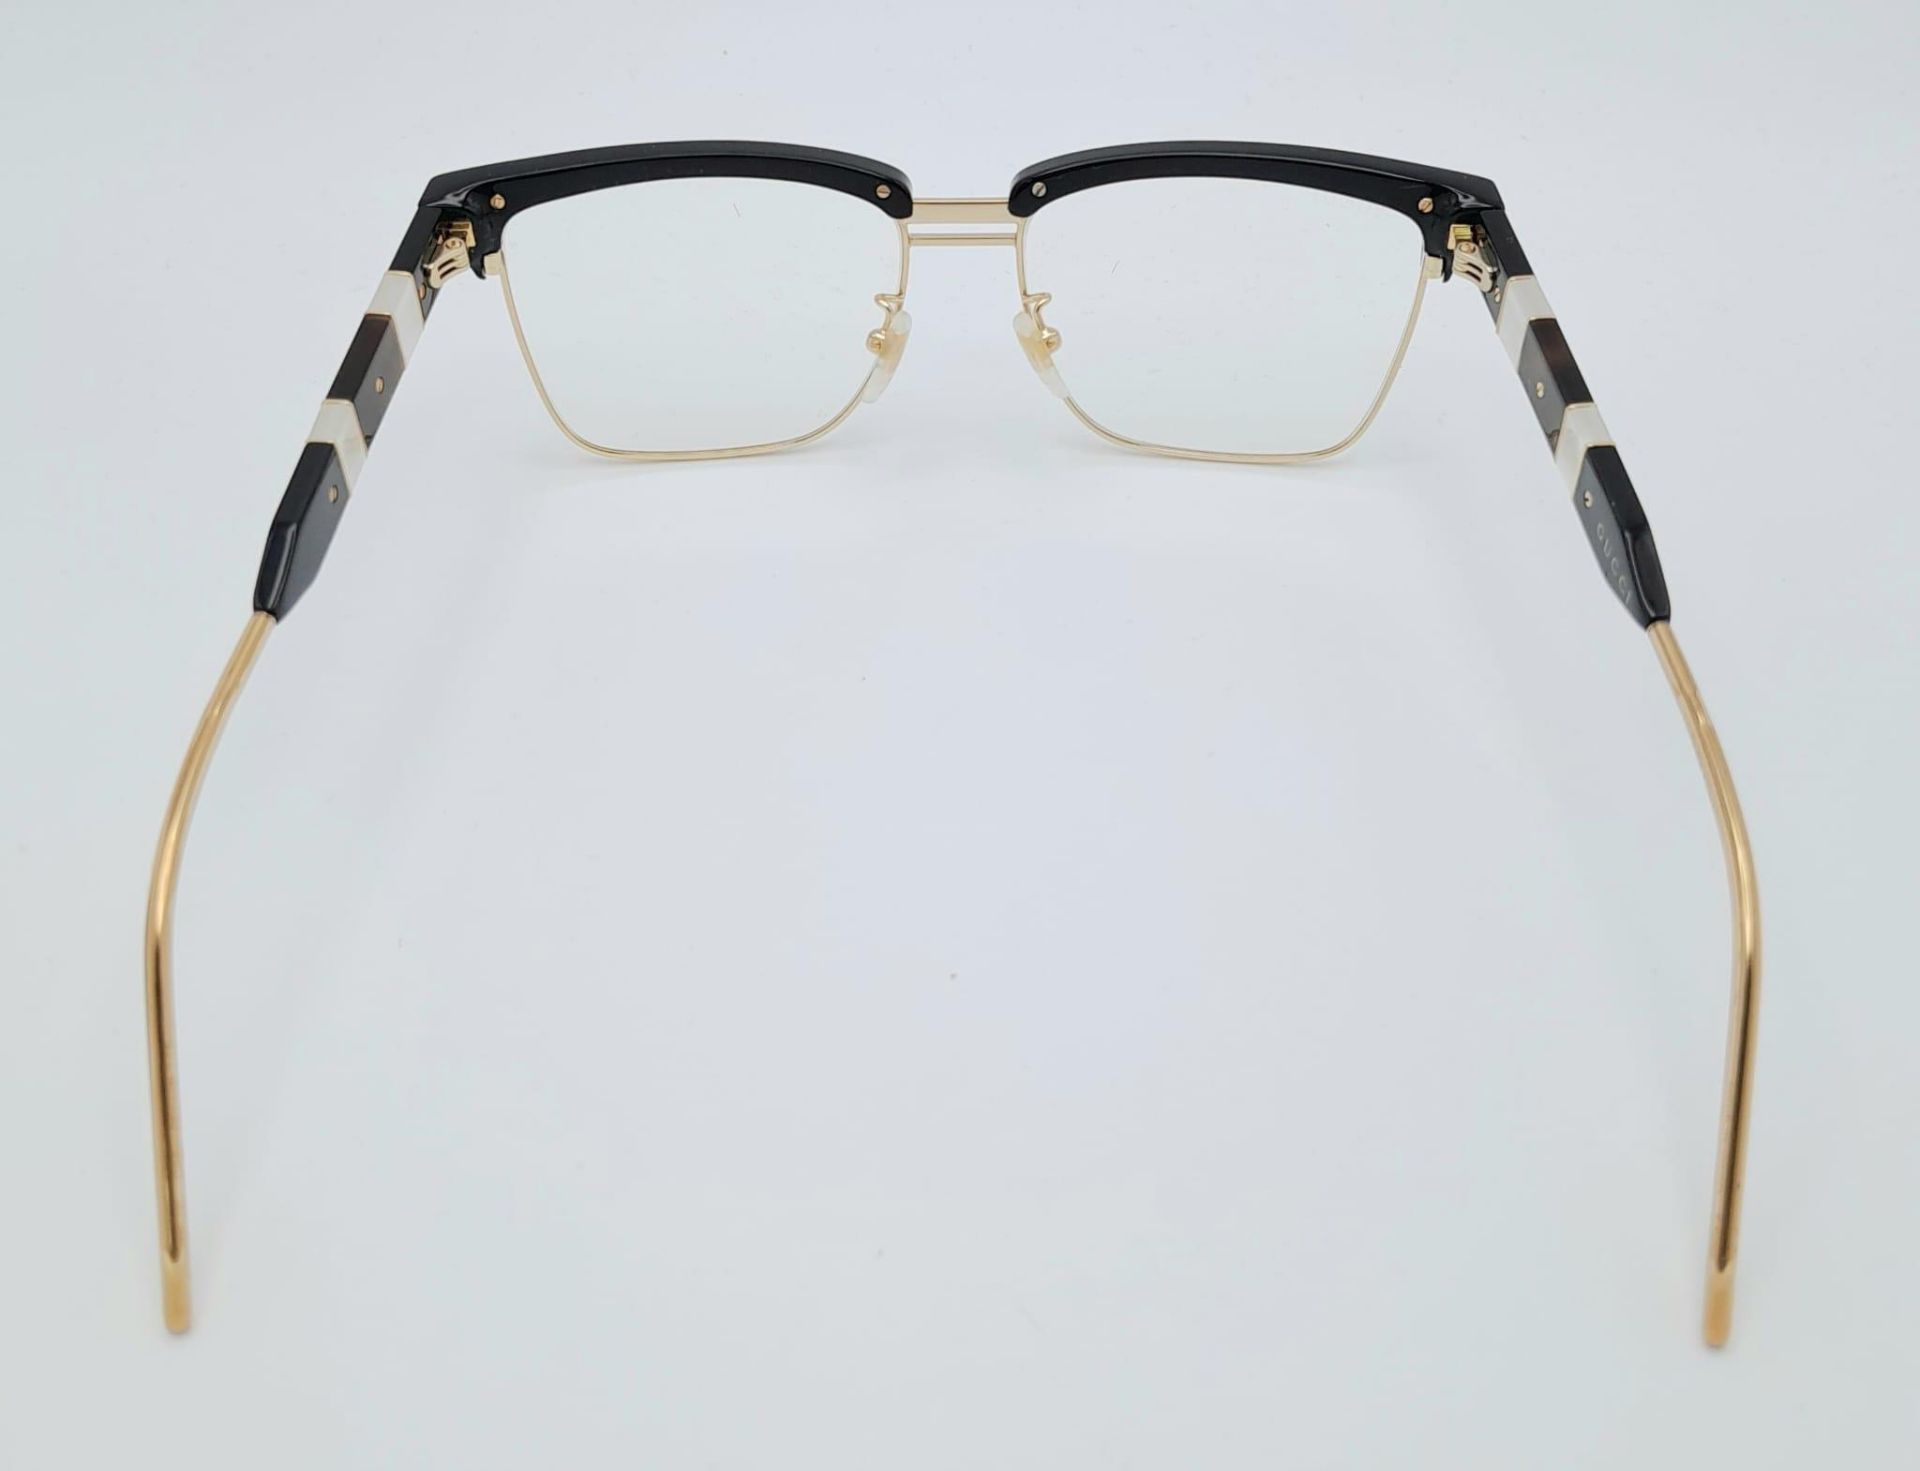 A GUCCI pair of glasses, gold plated in parts with mother of pearl highlights. Very stylish! - Image 4 of 5